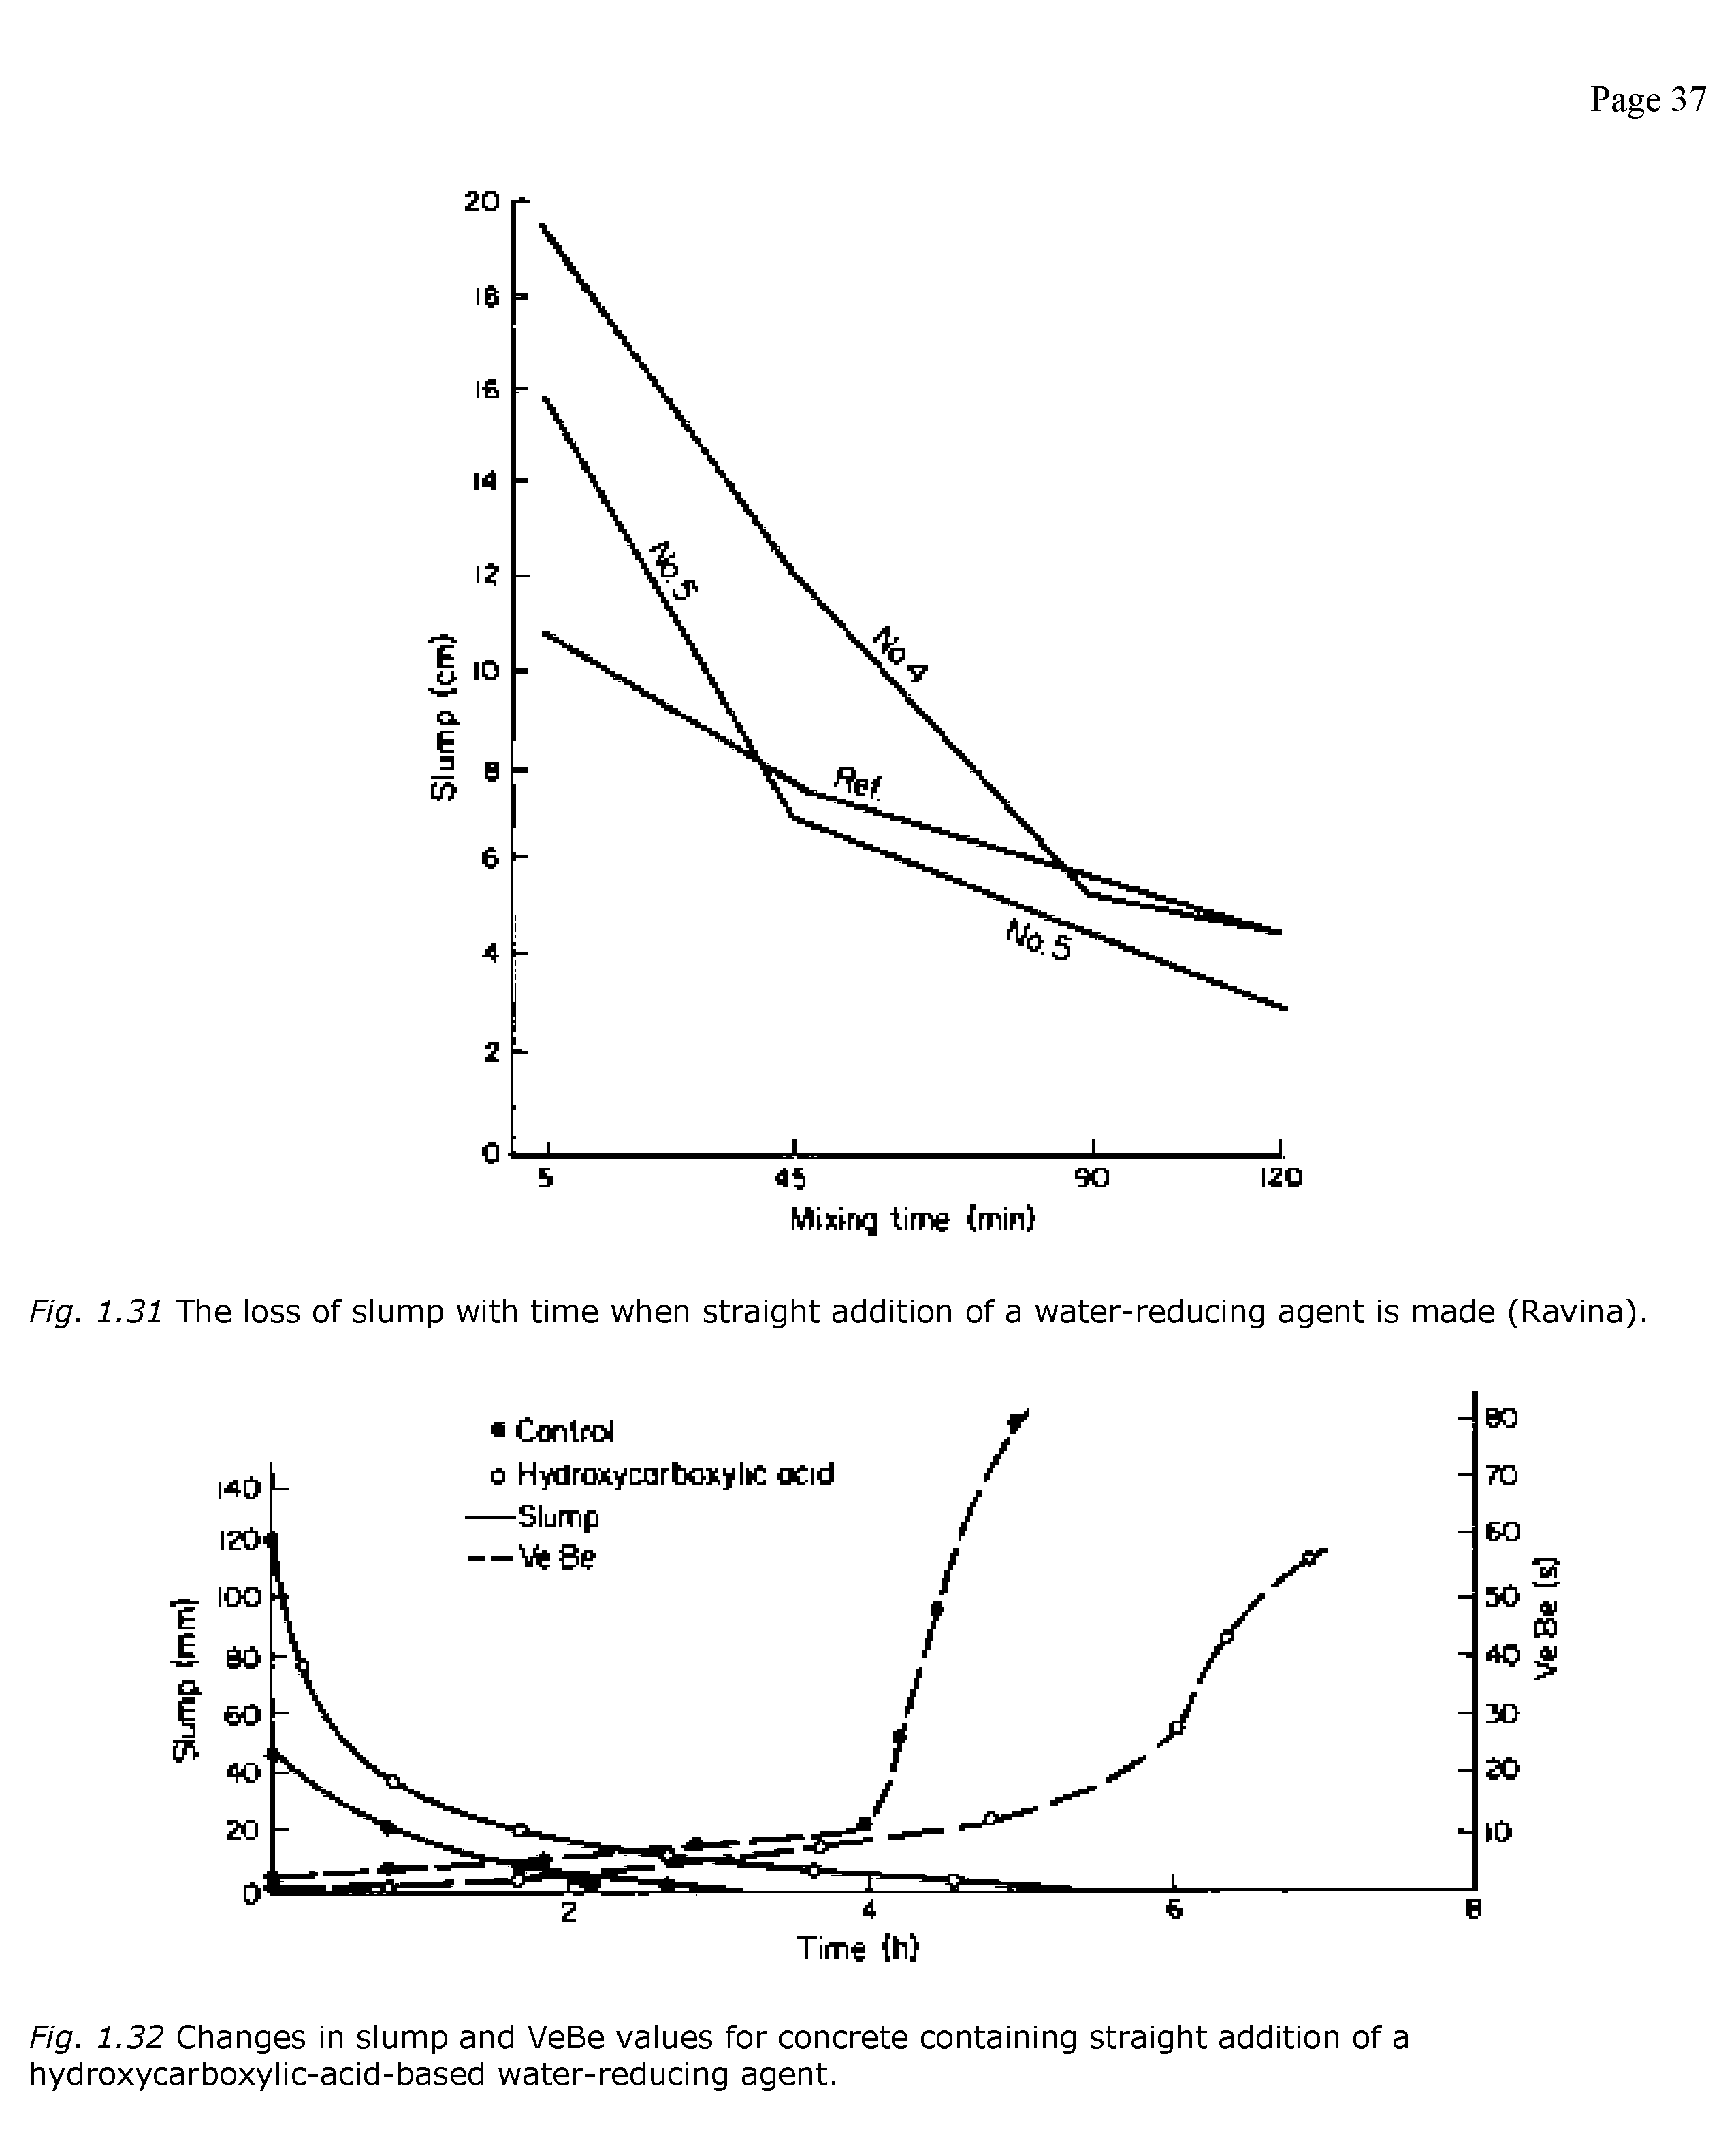 Fig. 1.32 Changes in slump and VeBe values for concrete containing straight addition of a hydroxycarboxylic-acid-based water-reducing agent.